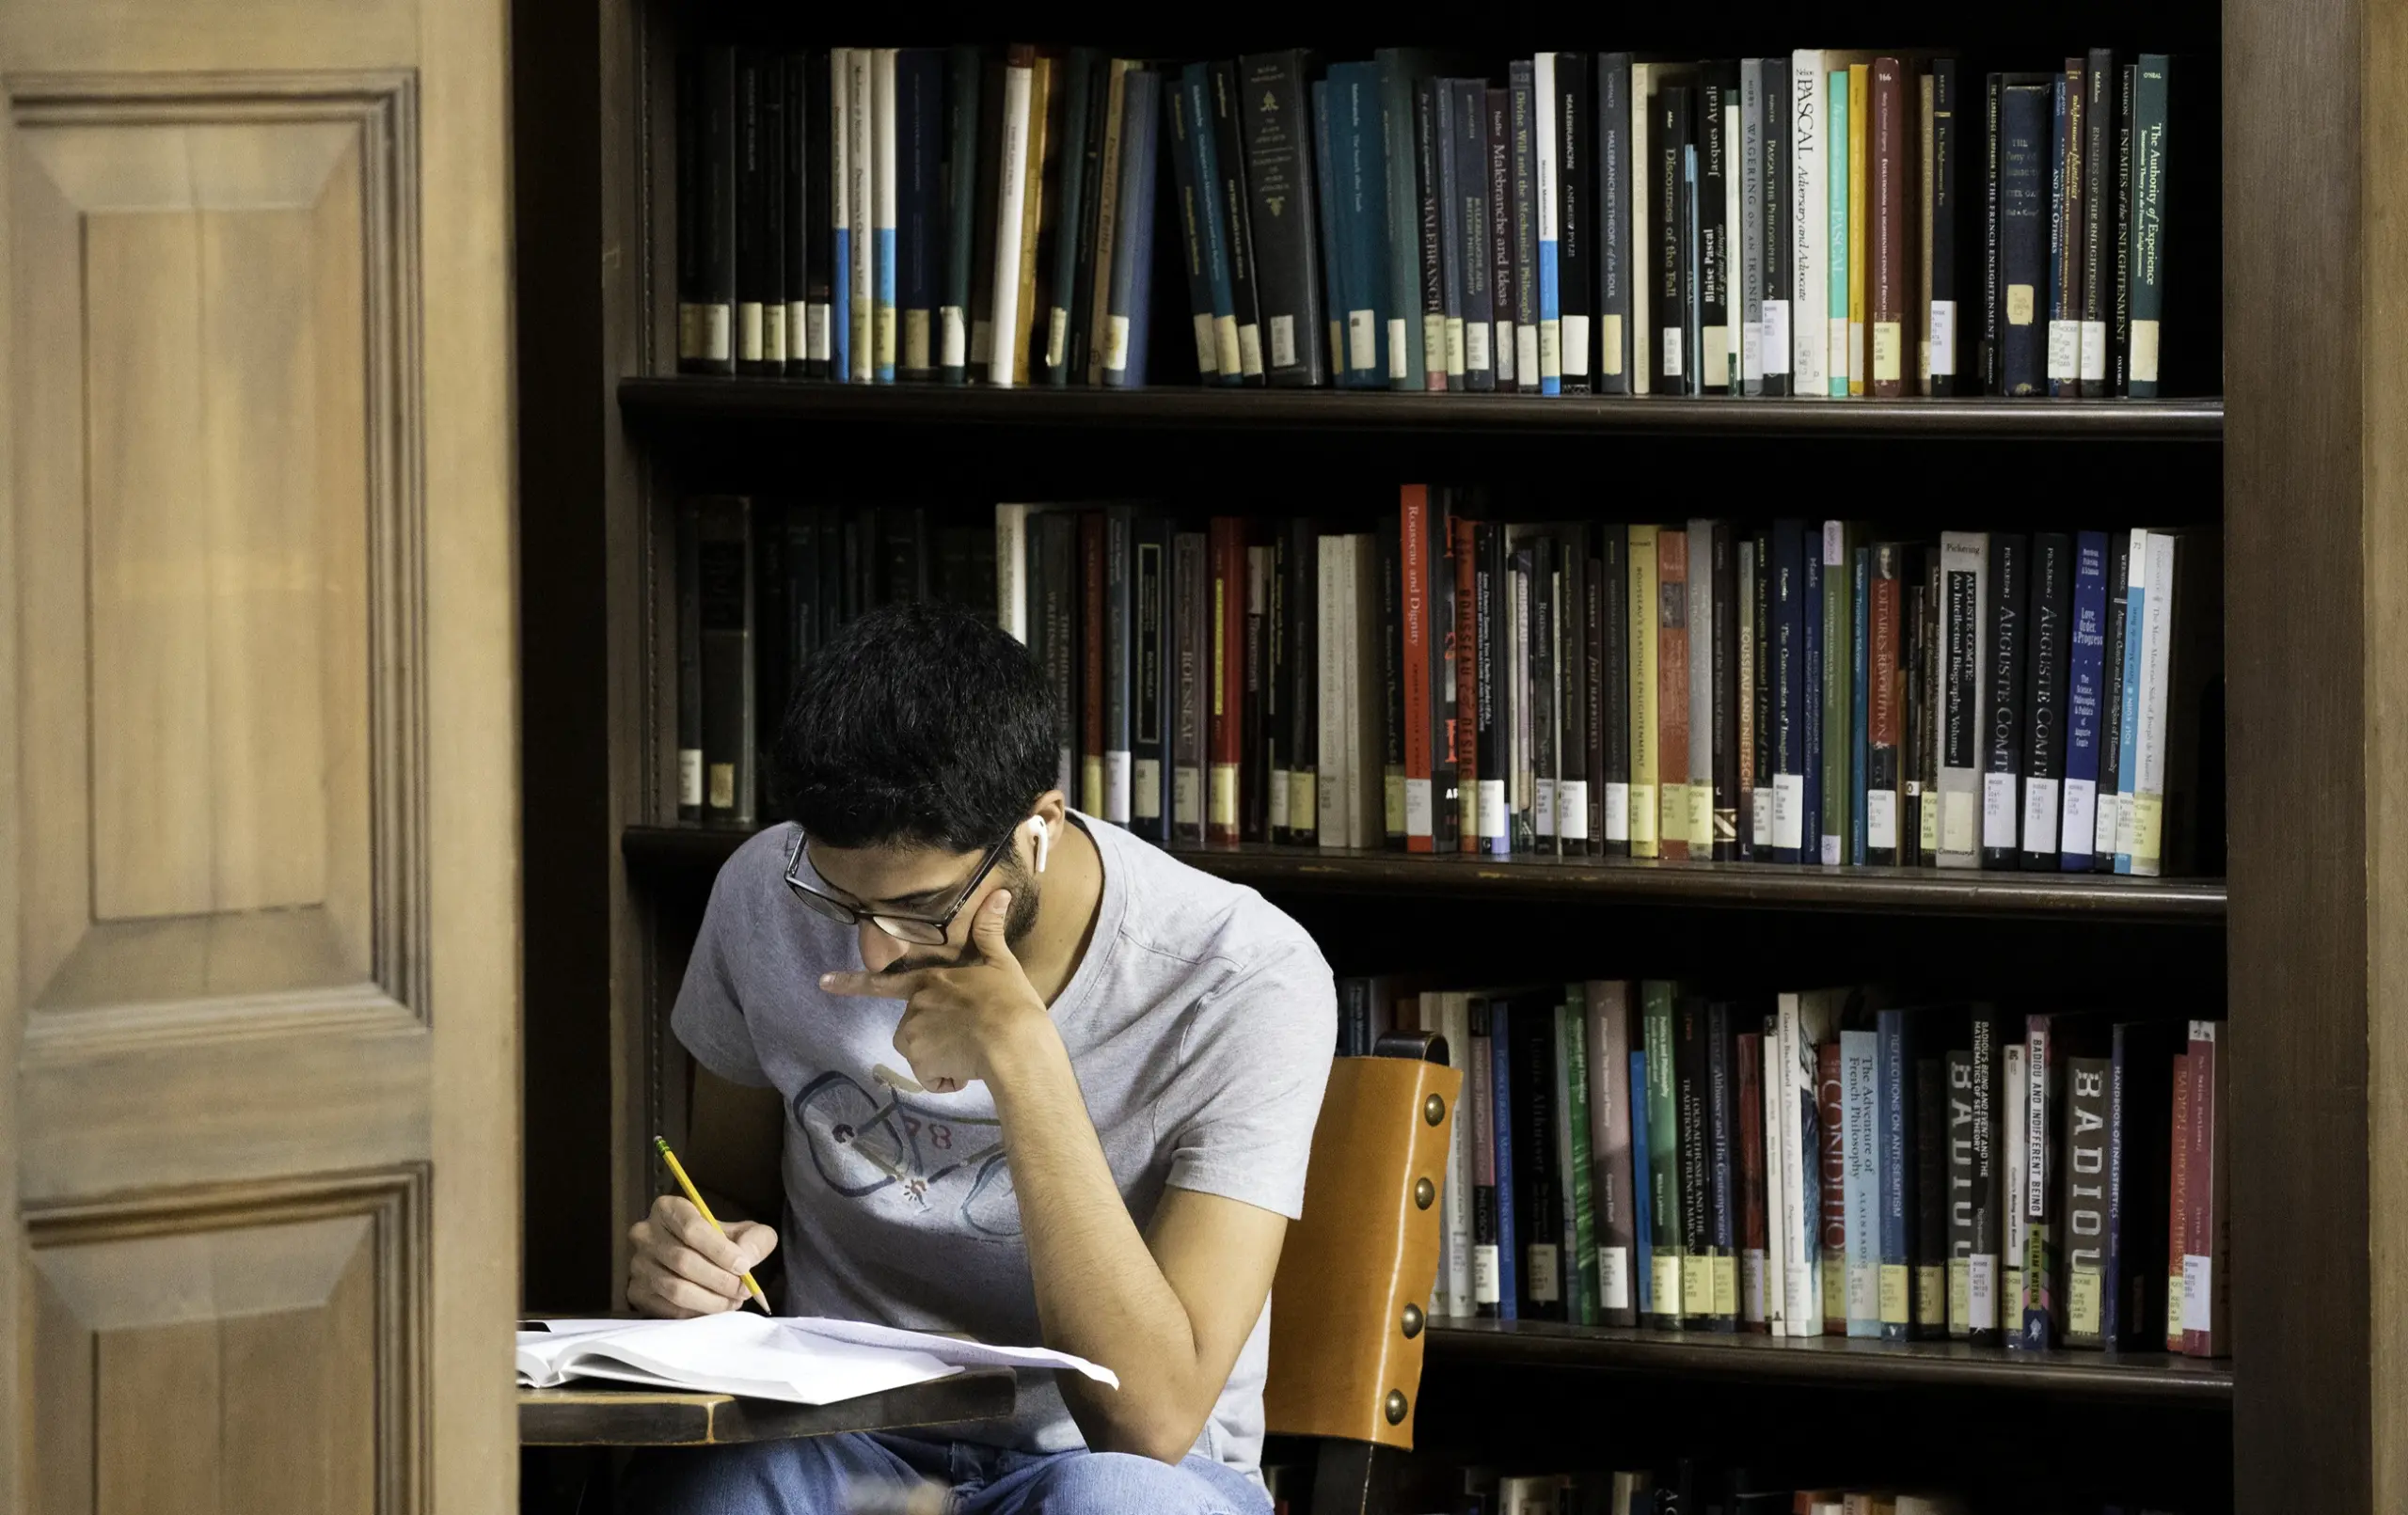 USC graduate student studying in a library